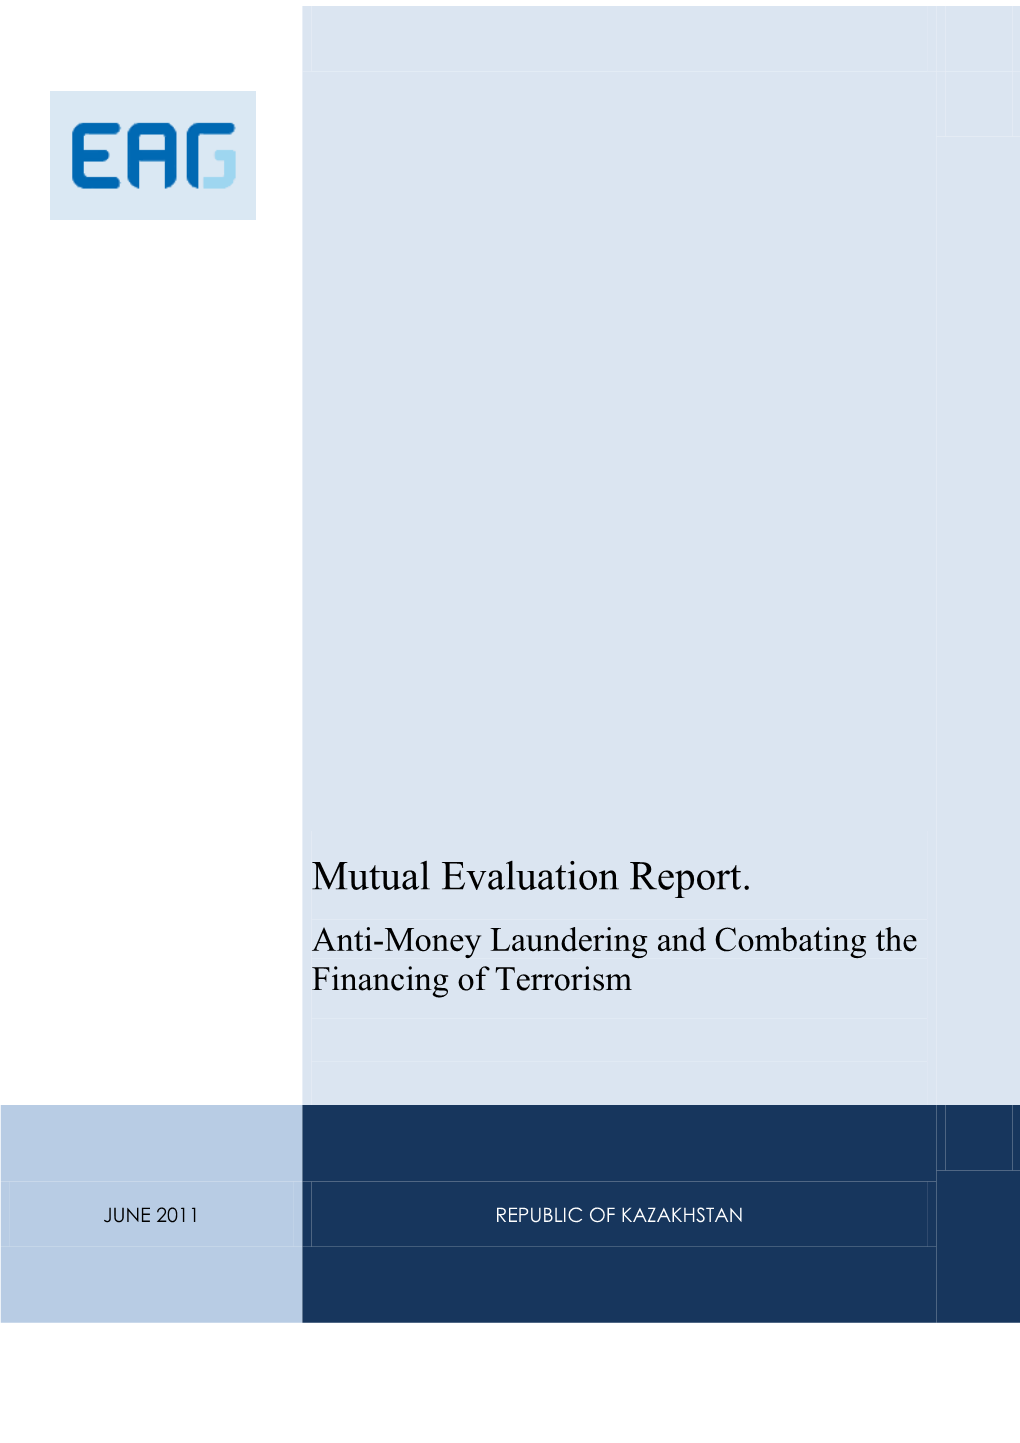 Mutual Evaluation Report, Anti-Money Laundering And